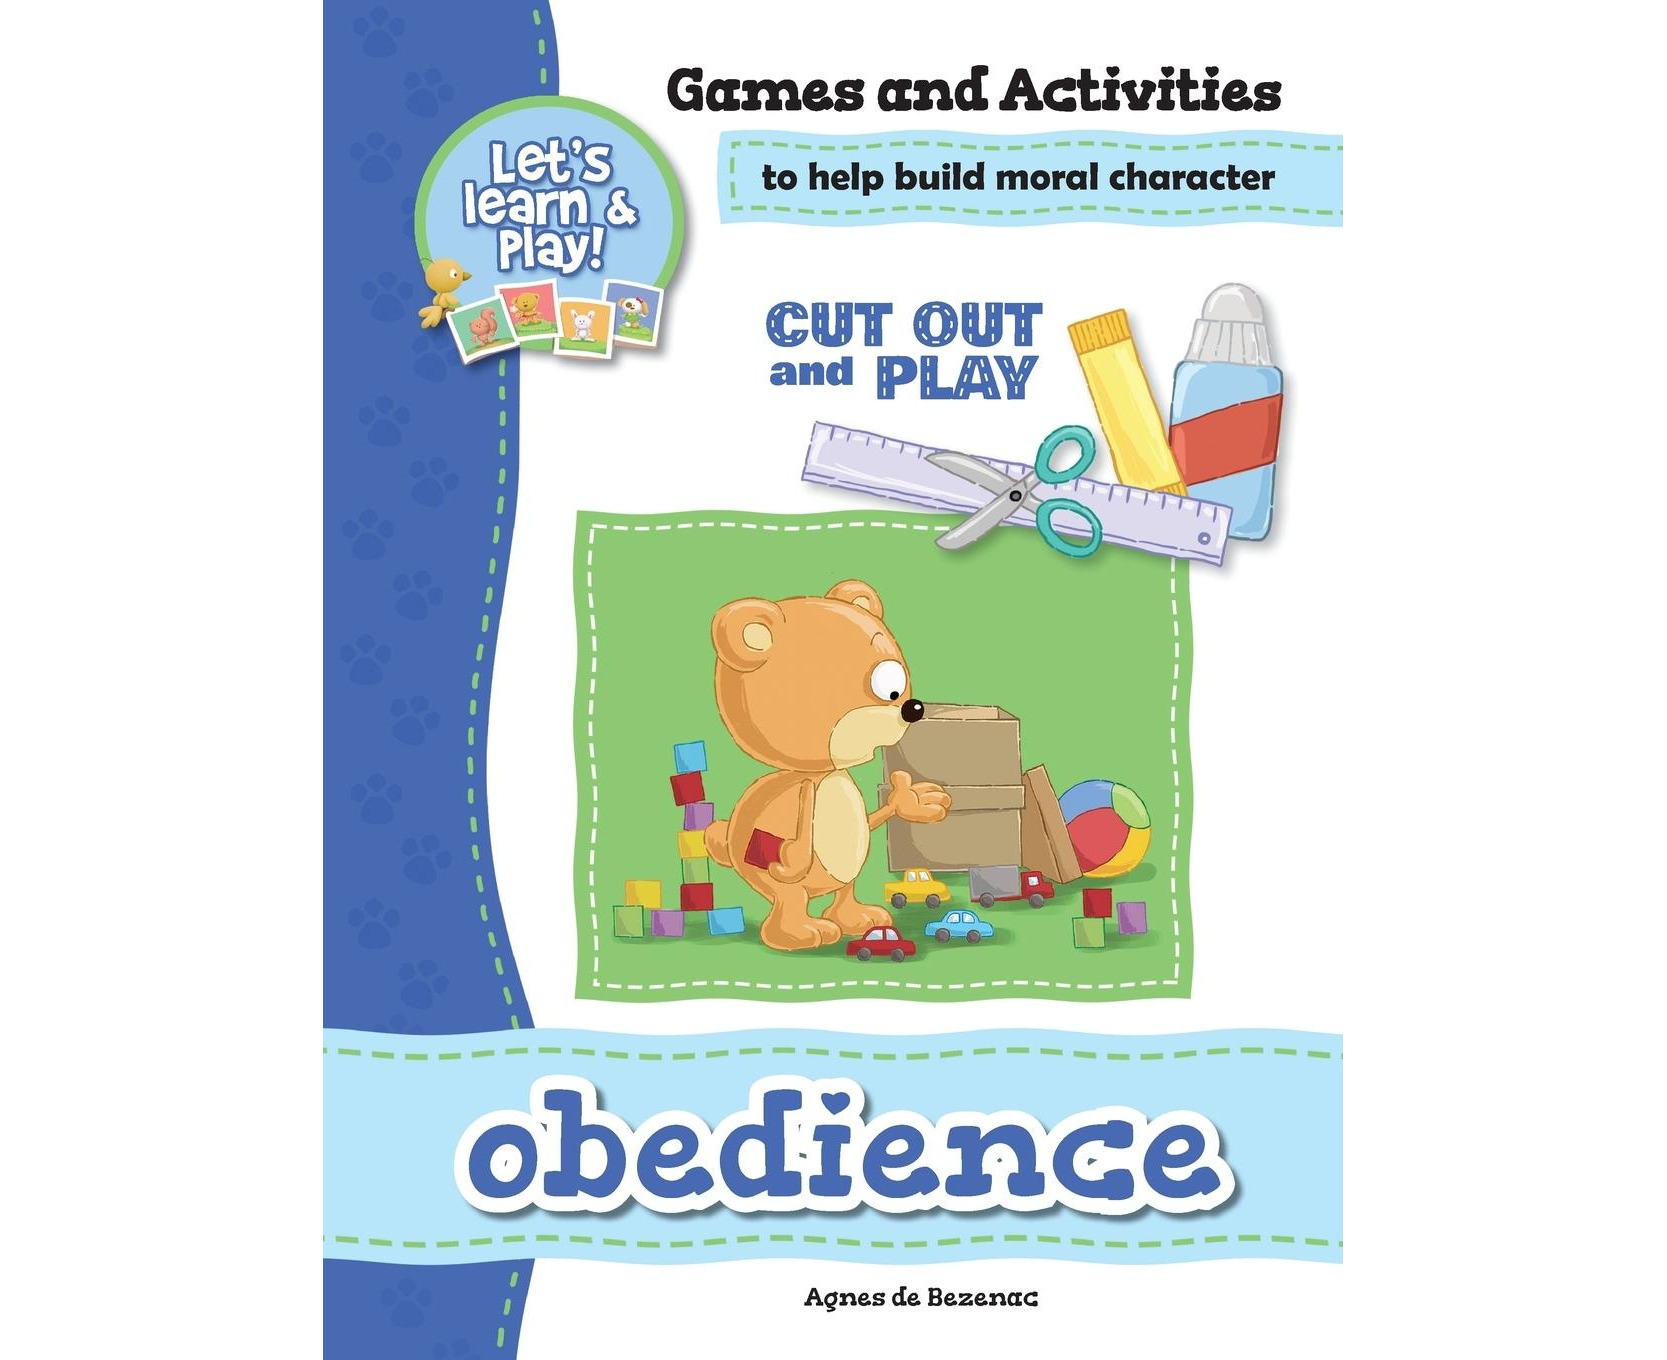 obedience-games-and-activities-games-and-activities-to-help-build